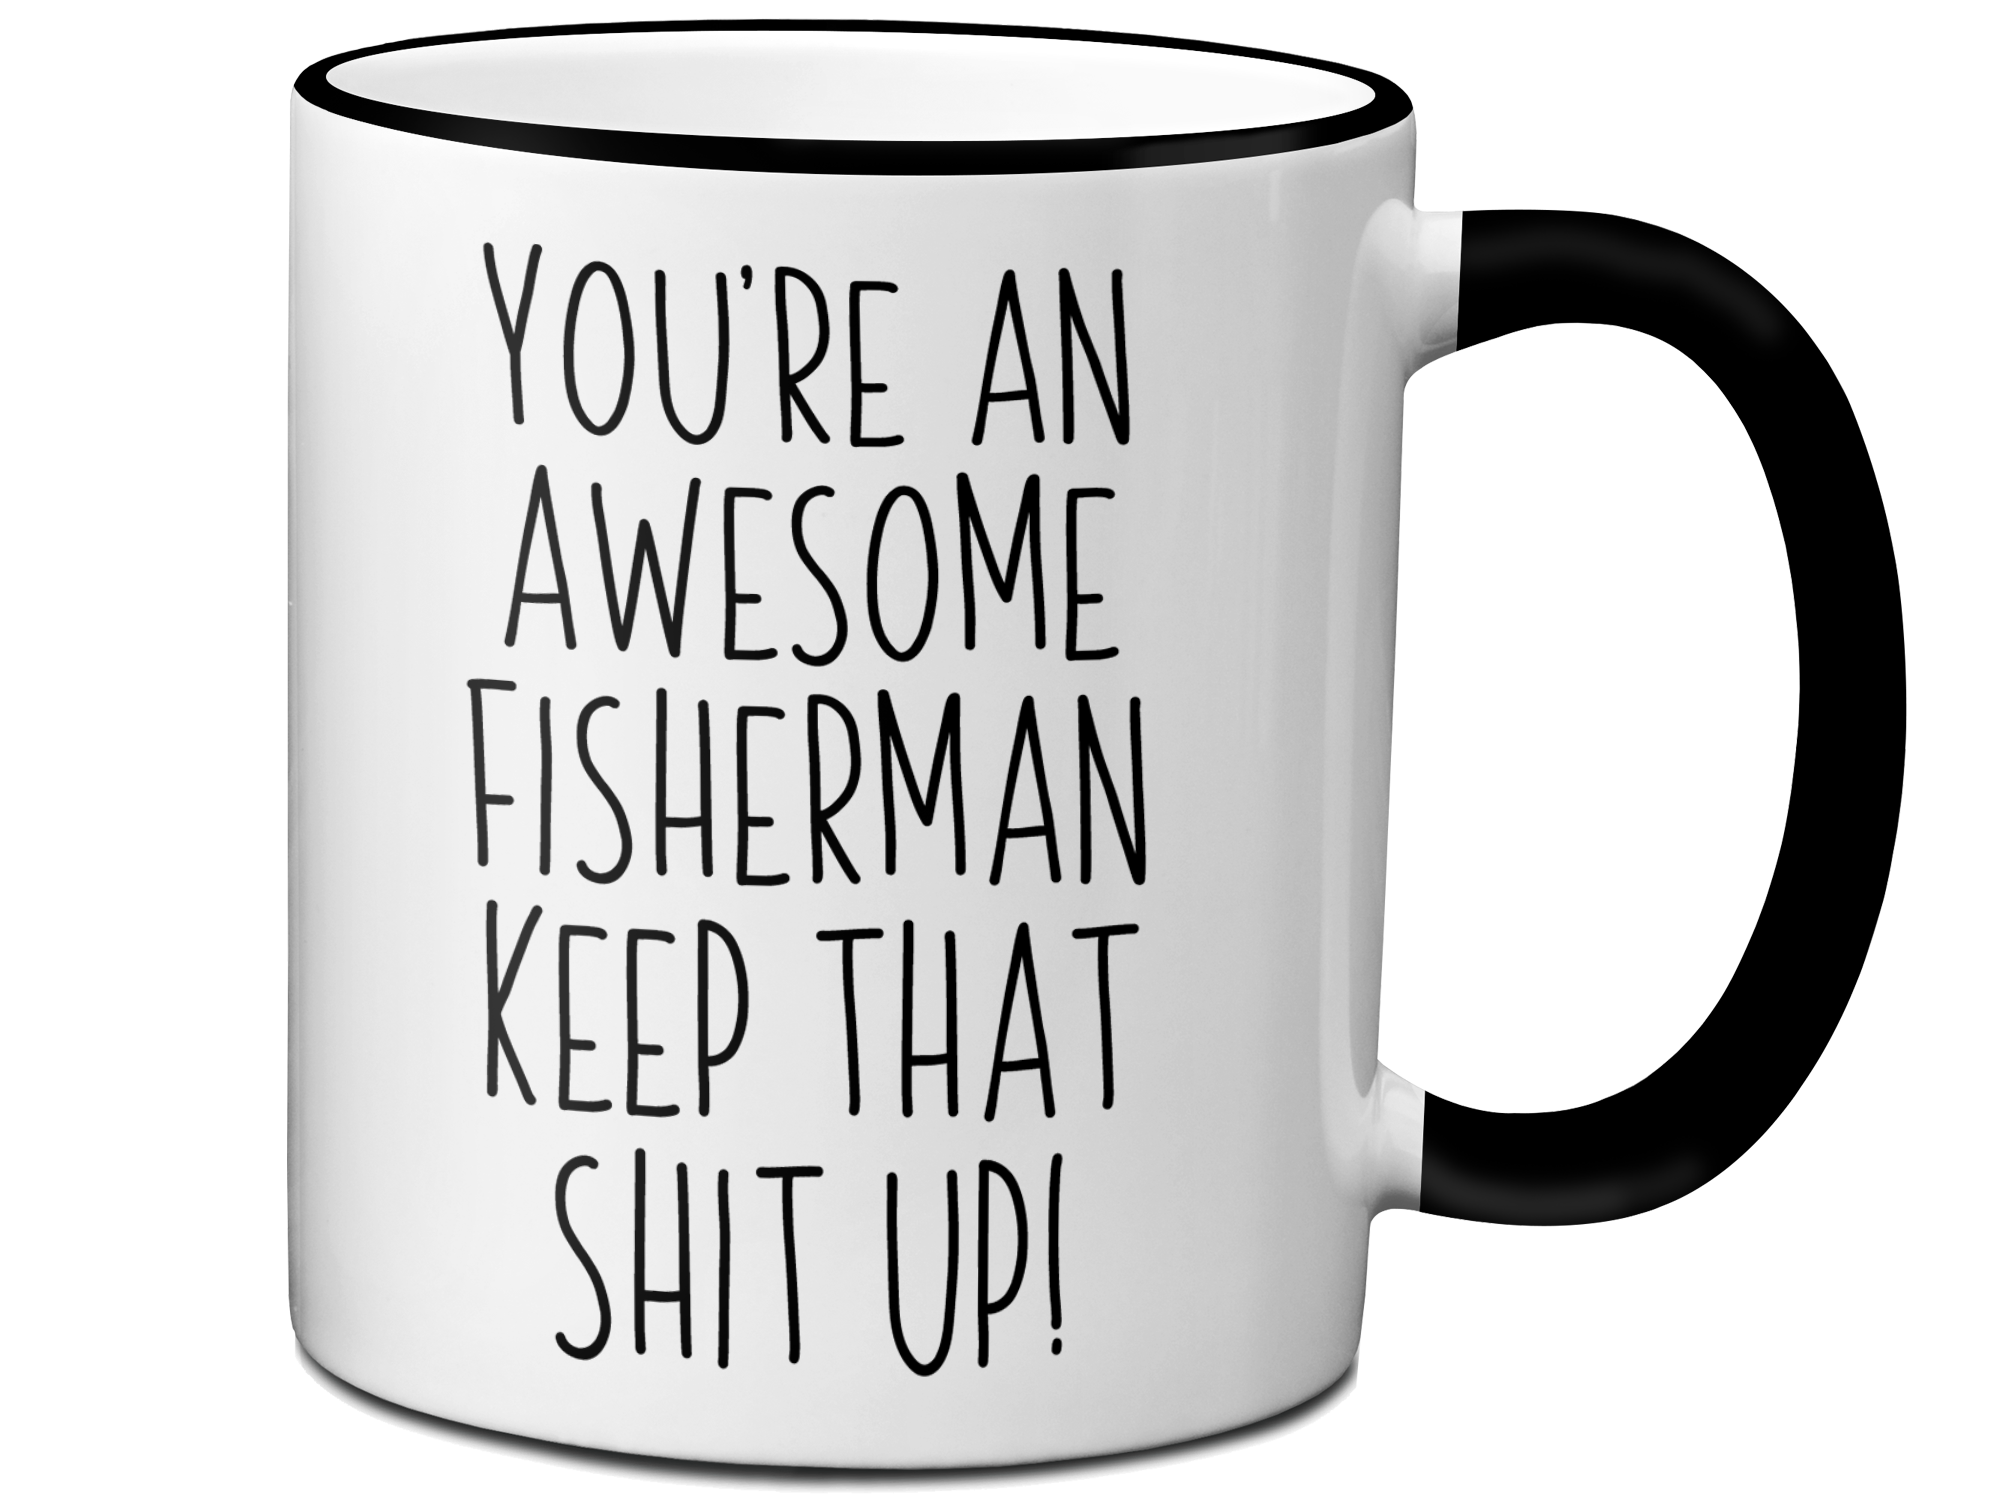 Funny Gifts for Fishermen - You're an Awesome Fisherman Keep That Shit Up Gag Coffee Mug